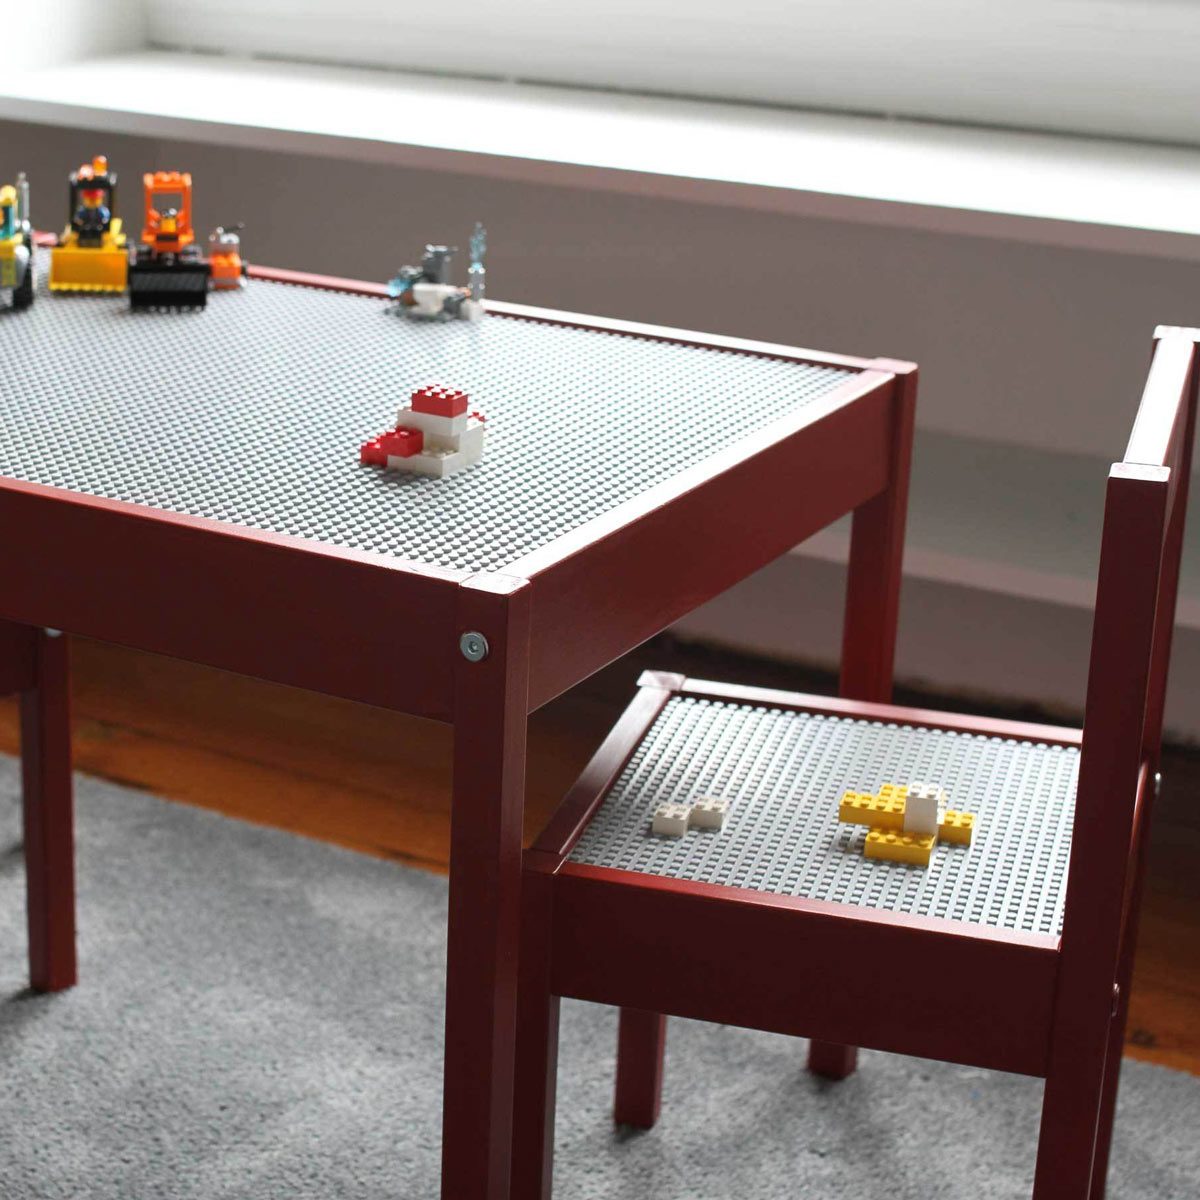 Top 10 LEGO Tables You've Got to See — The Family Handyman